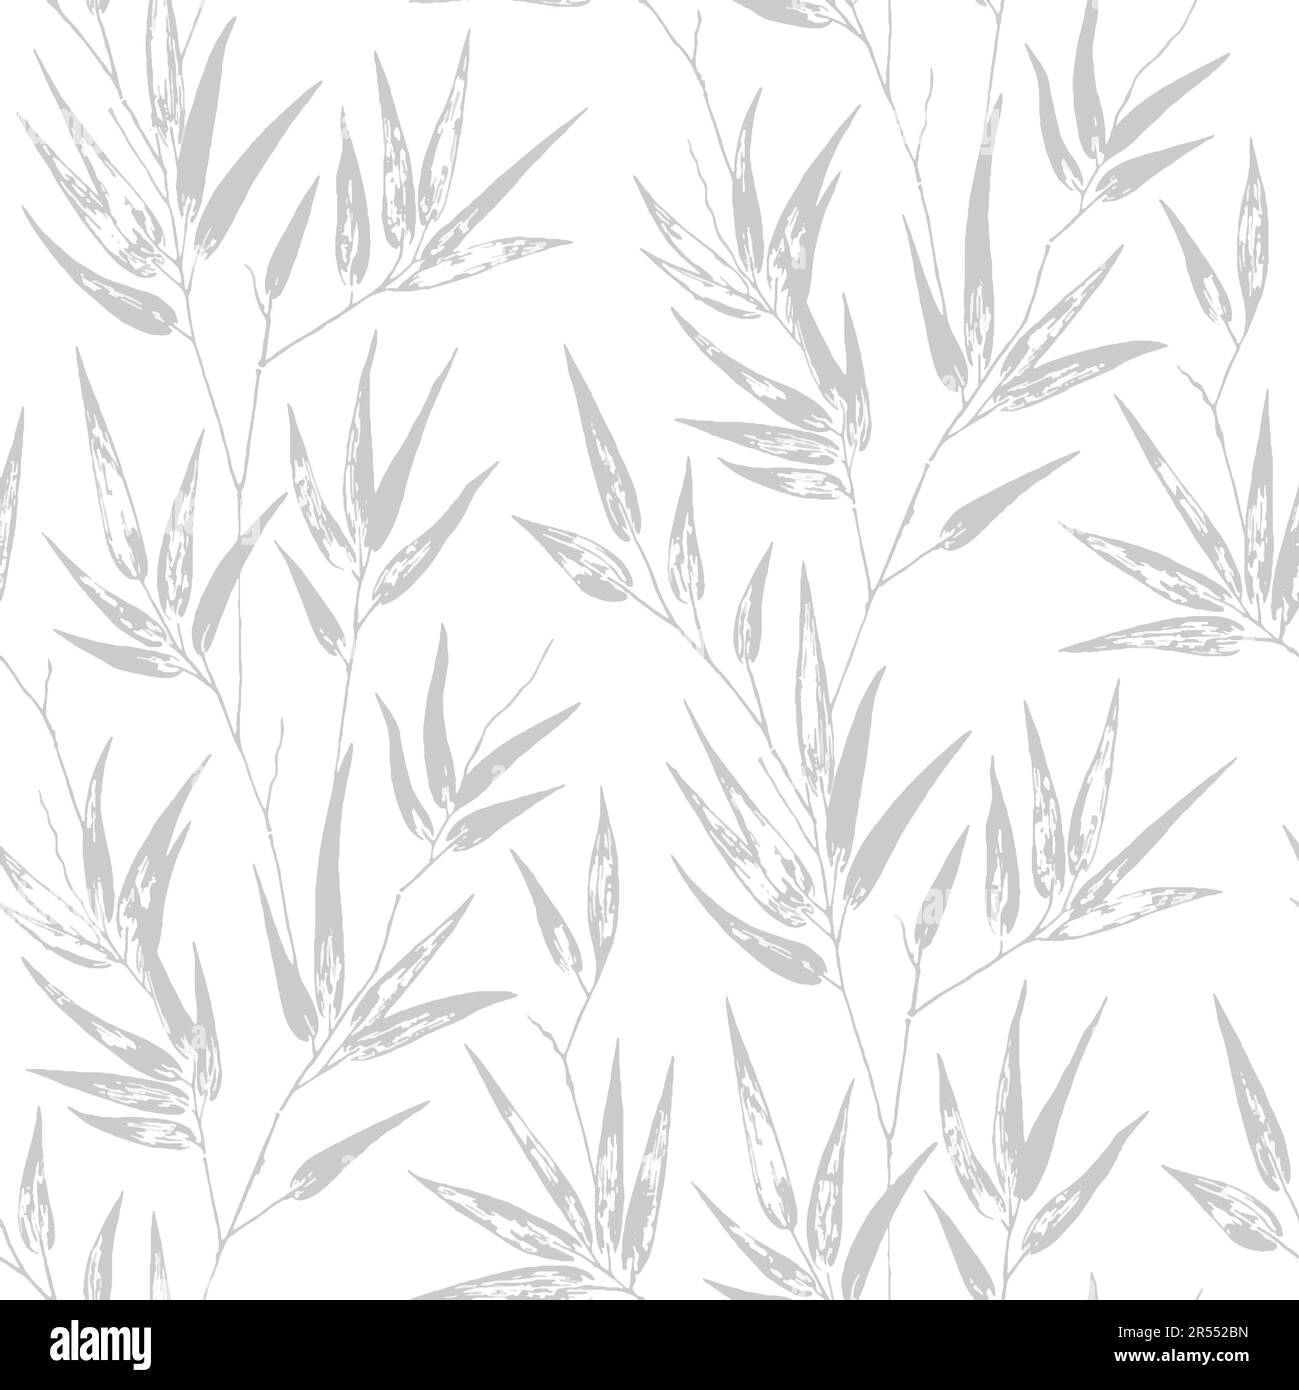 Seamless pattern texture fashionable textile print. Stock Vector